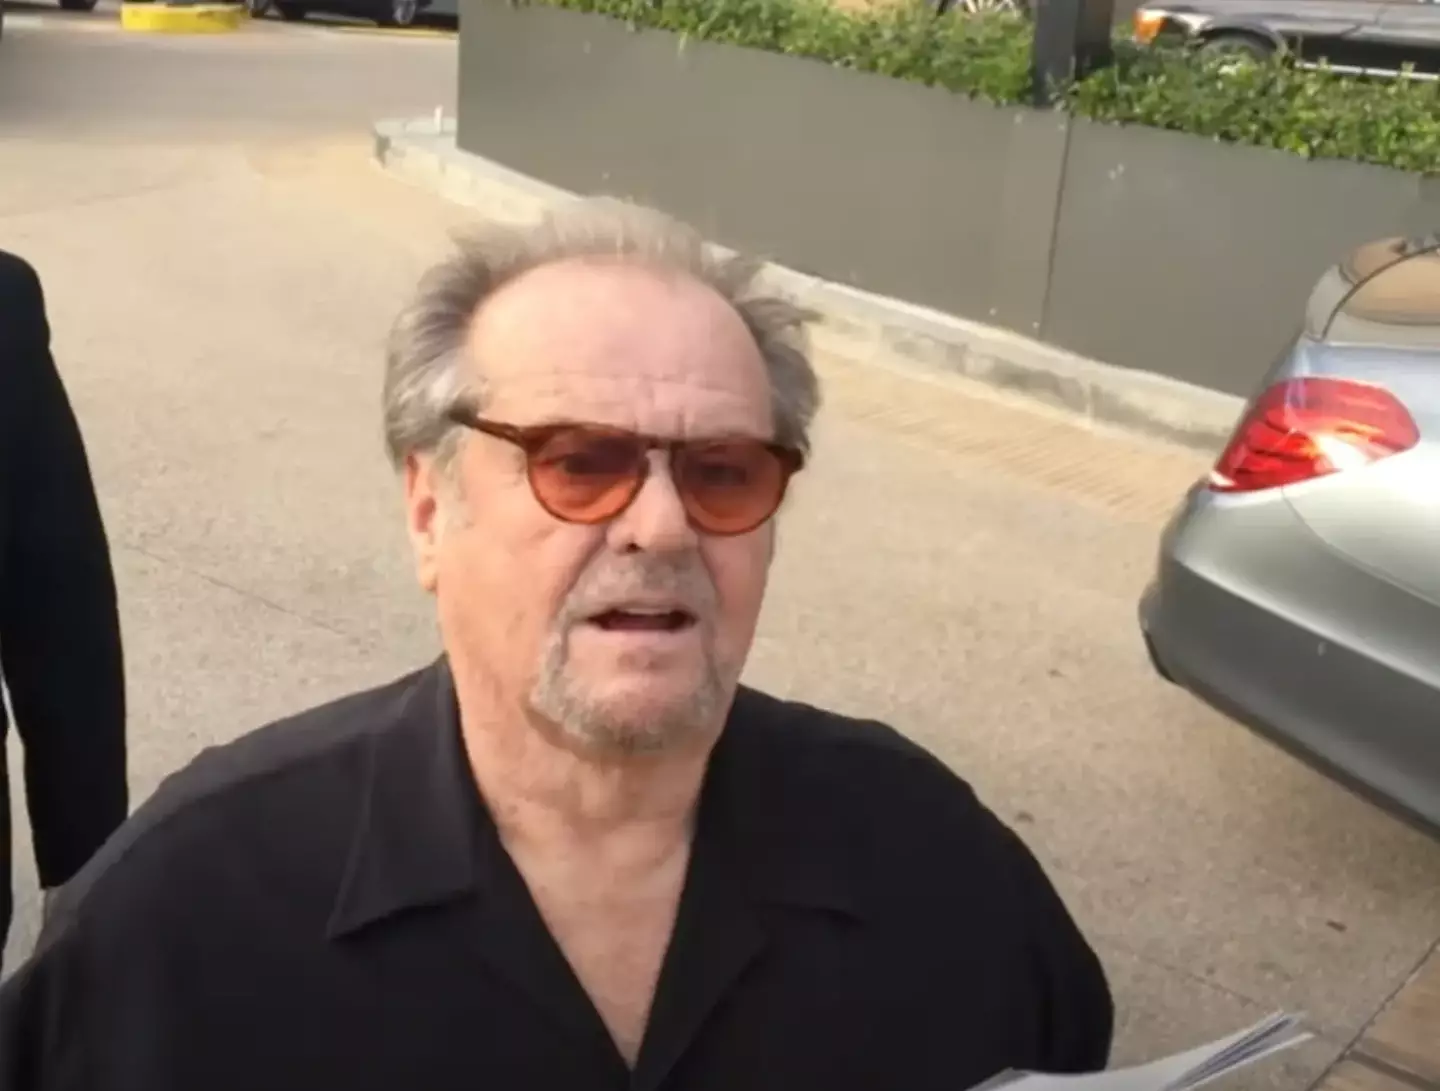 Jack Nicholson had a very honest answer for one of his fans.